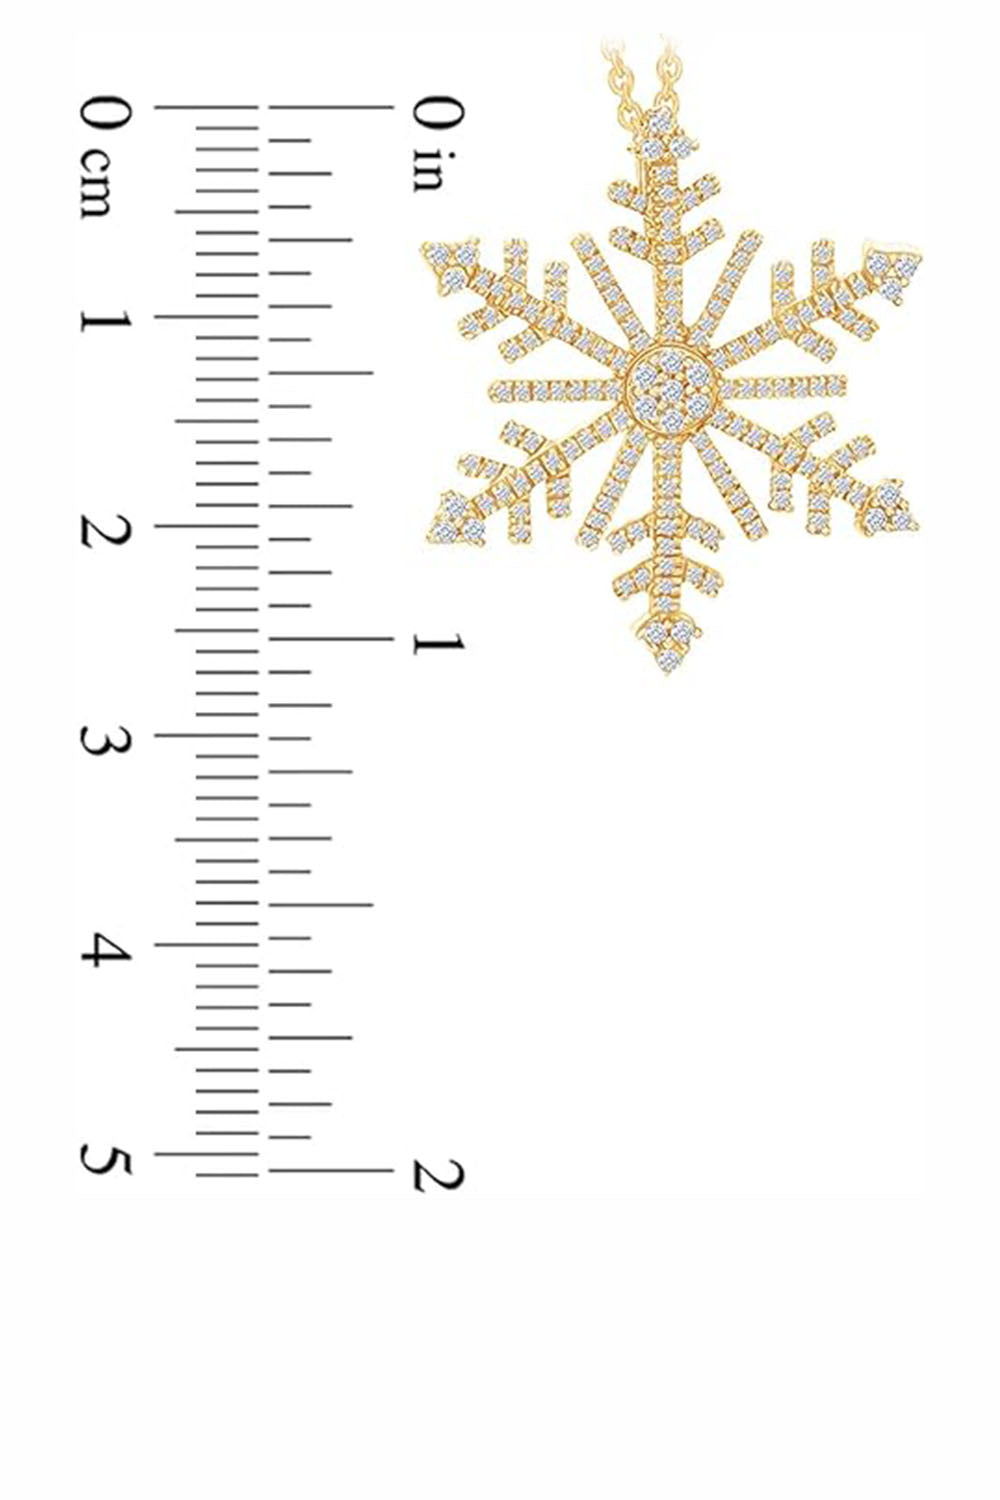 1/2 Carat Moissanite Snowflake Pendant Necklace in 18K Gold Plated Sterling Silver Anniversary Christmas Jewellery Gift.